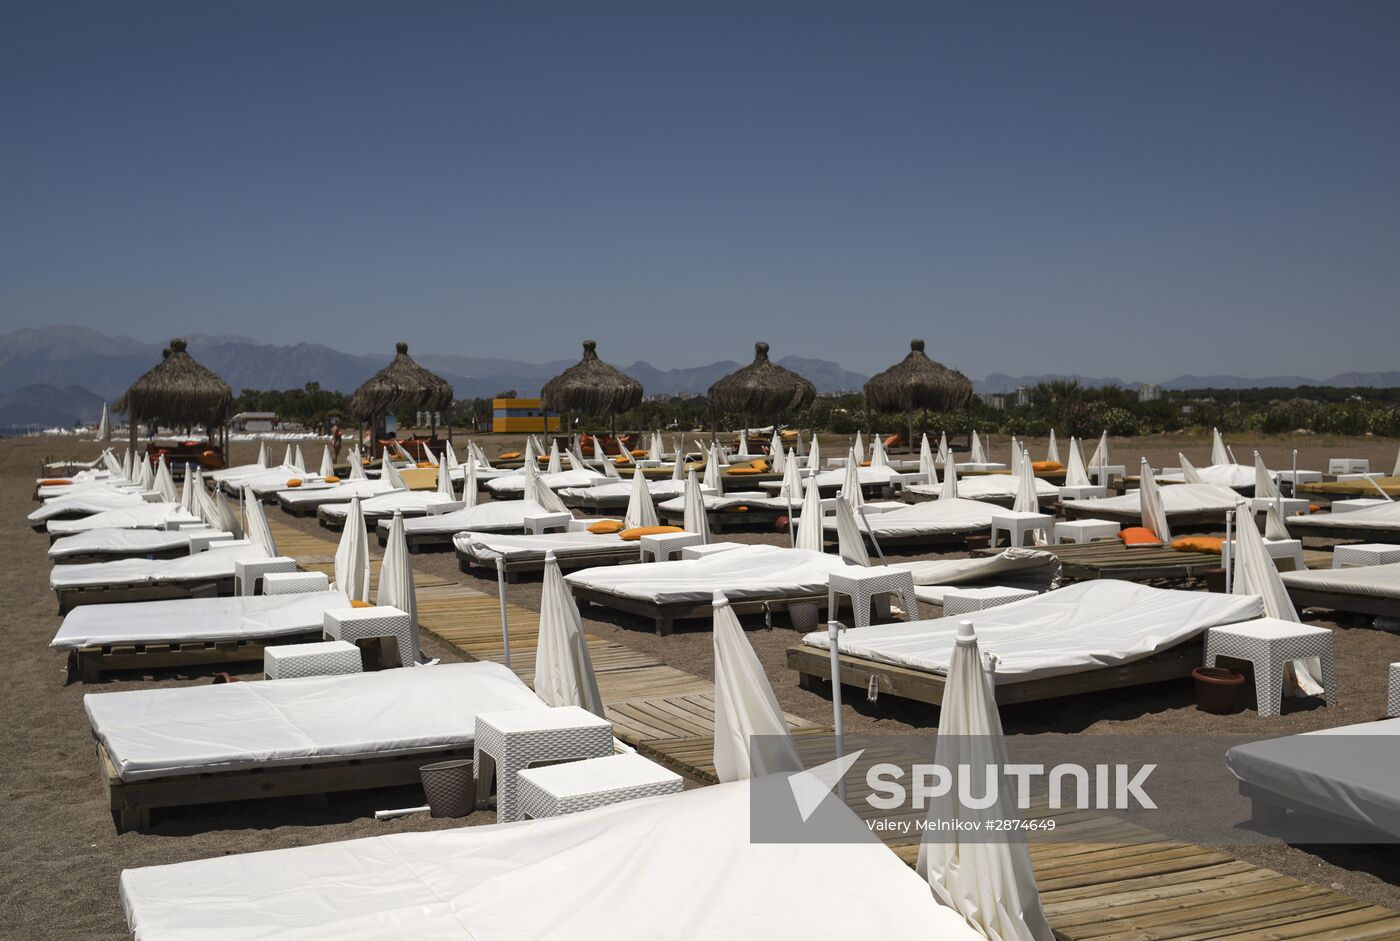 Turkey's resorts face decline in tourst flow from Russia